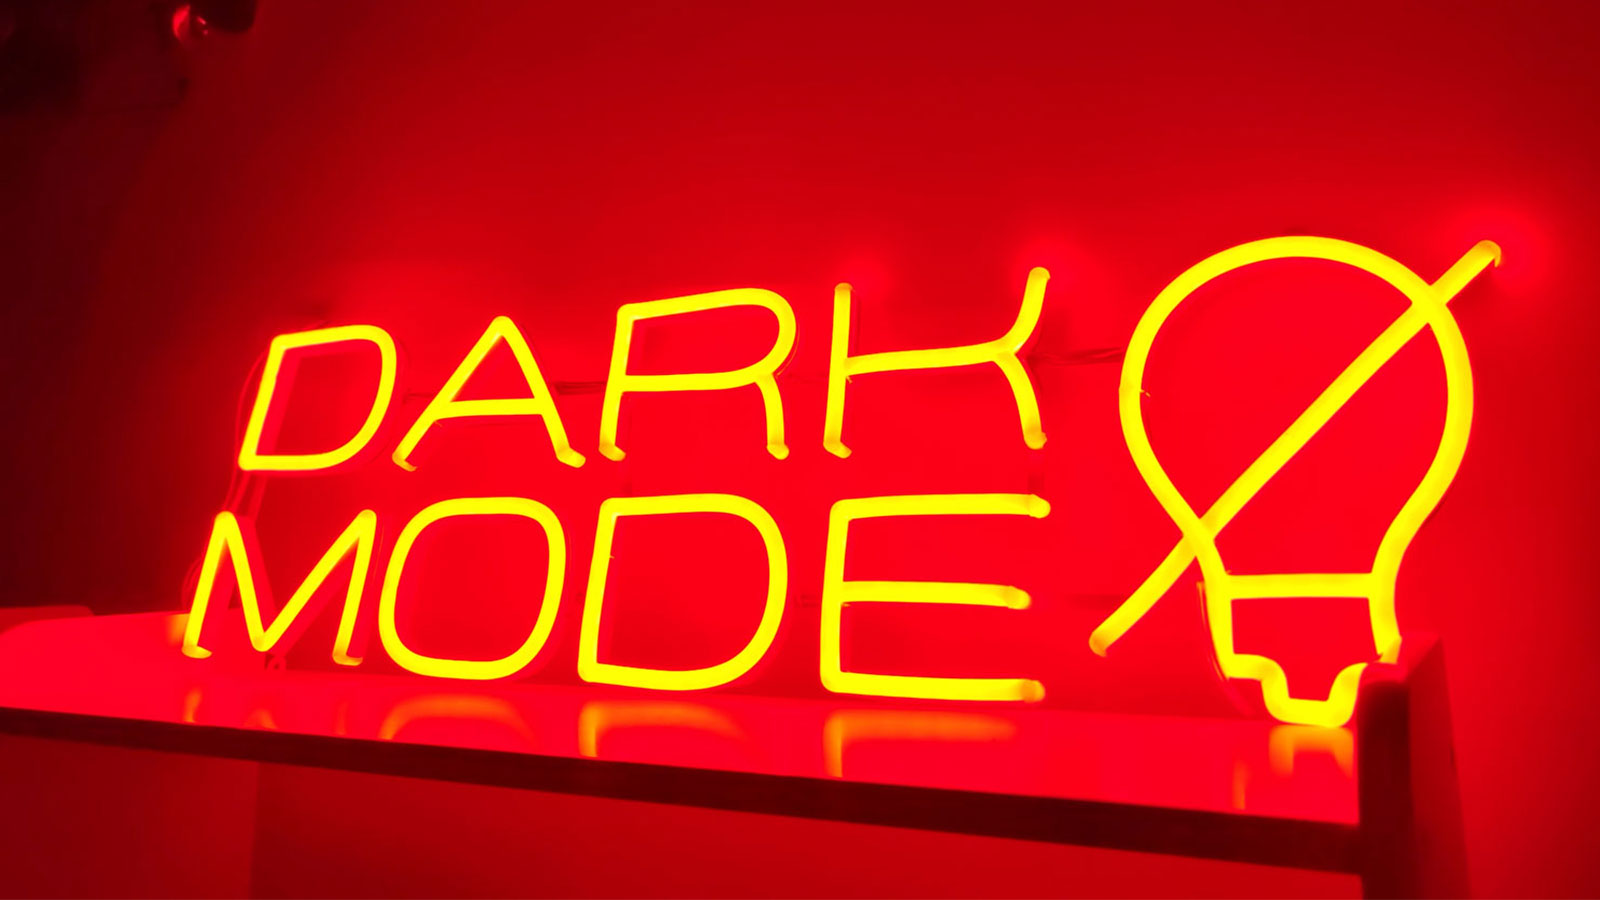 A neon sign in orange color with the text “DARK MODE”